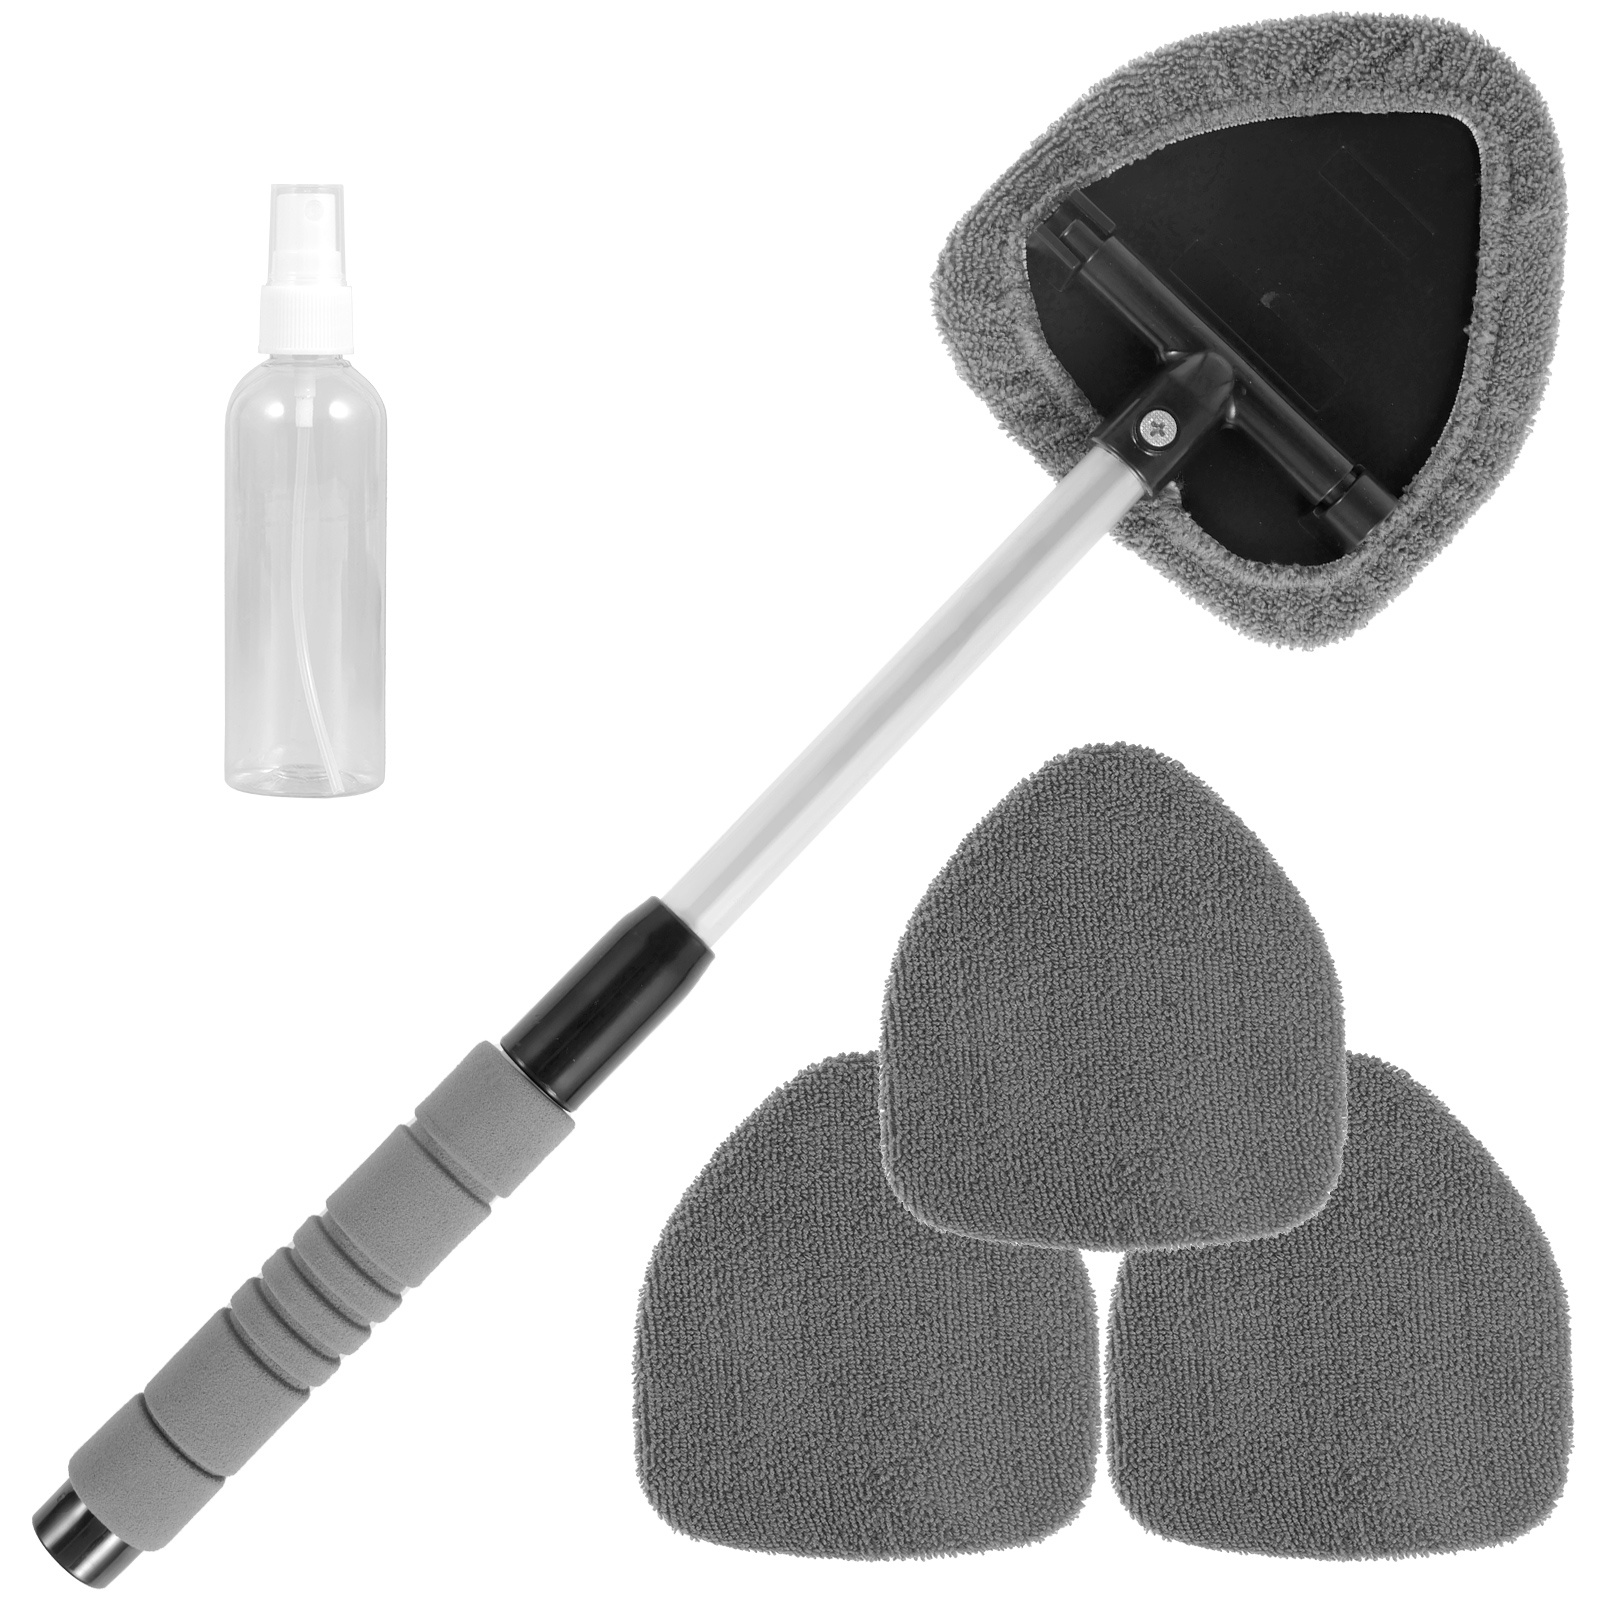 Beieverluck 3 Pieces Windshield Cleaner Tool Inside Car Window Cleaning with Extendable Handle Microfiber 9 Reusable Pads and at MechanicSurplus.com